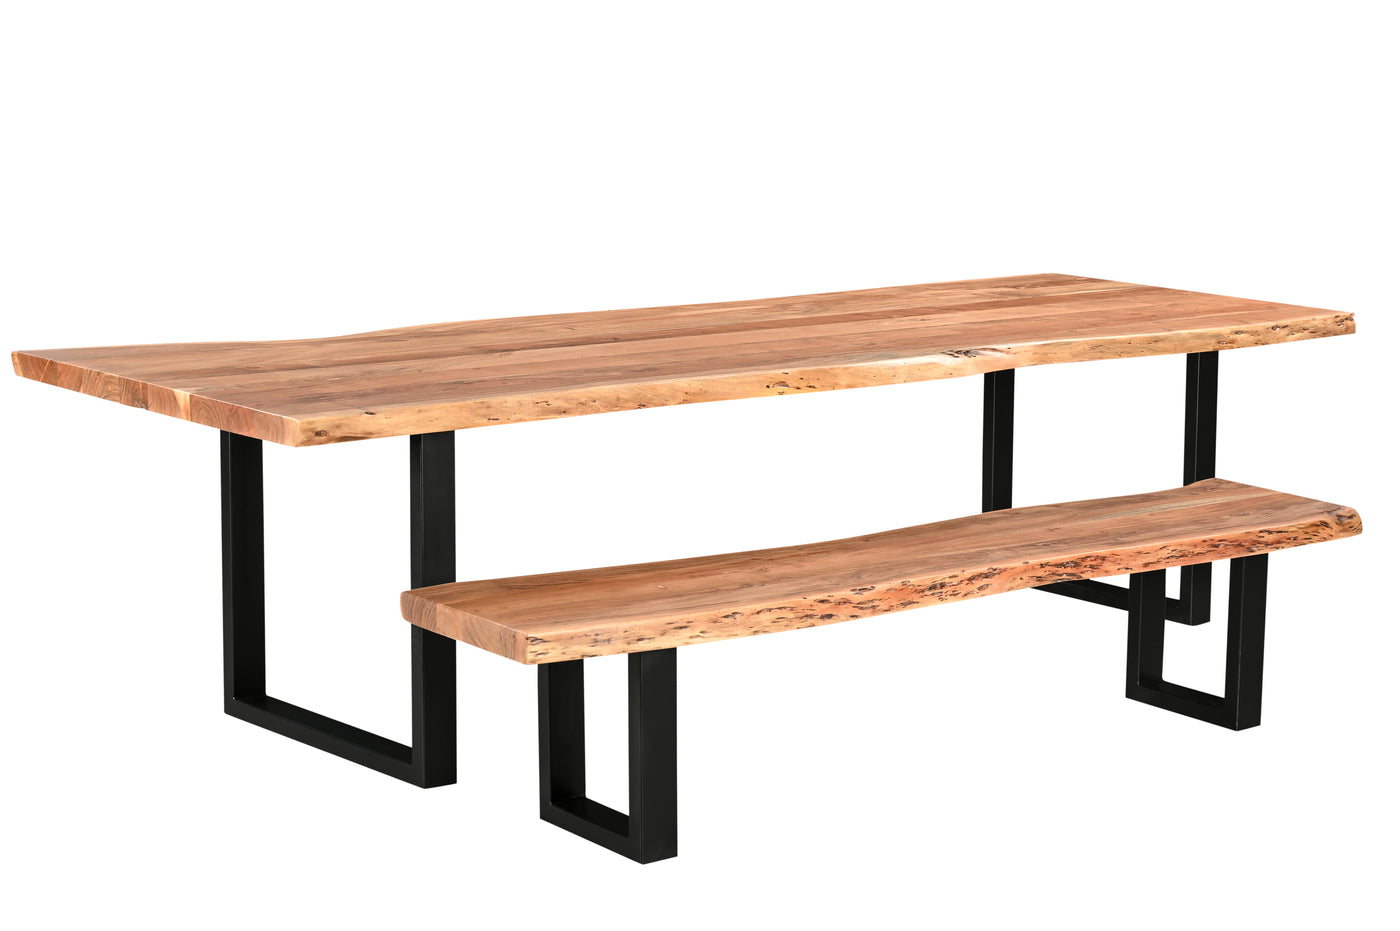 Live Edge Table And Chair Collection